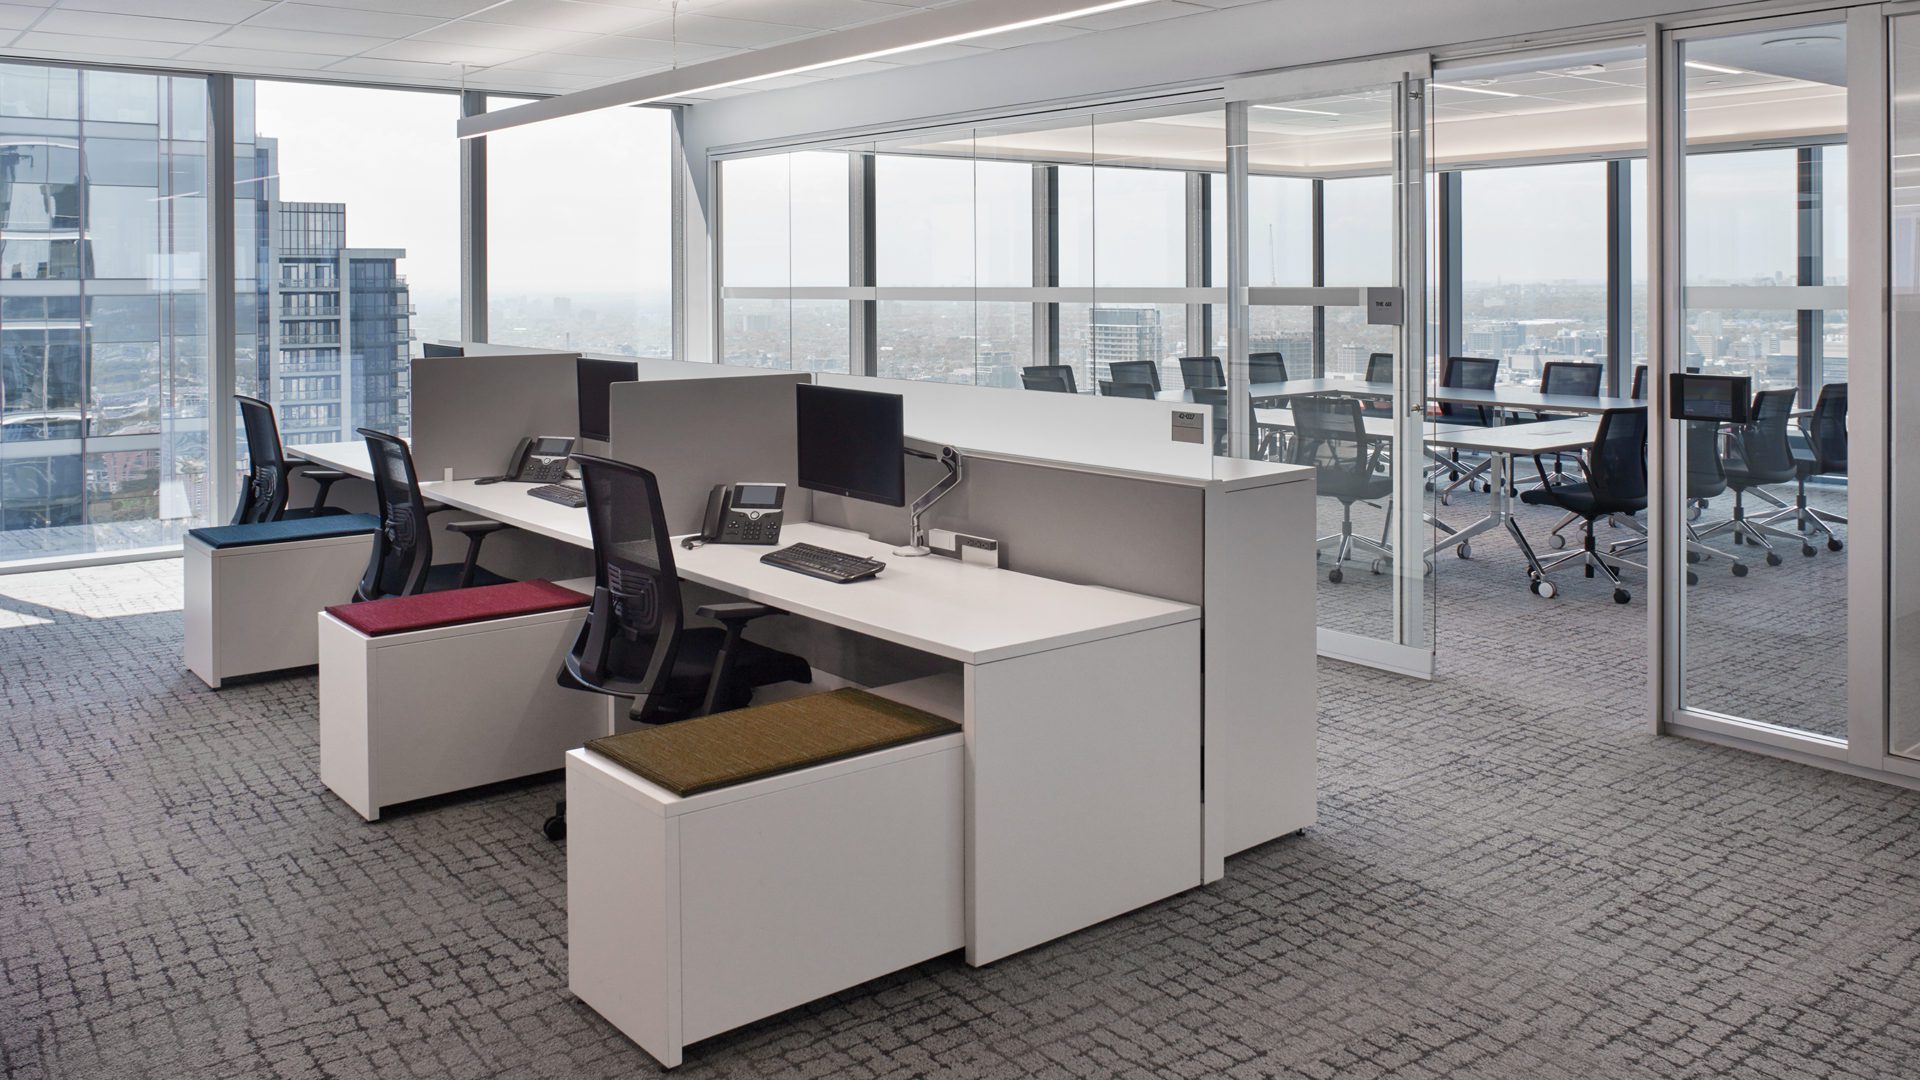 HarperCollins interior showing open office and adjacent meeting room